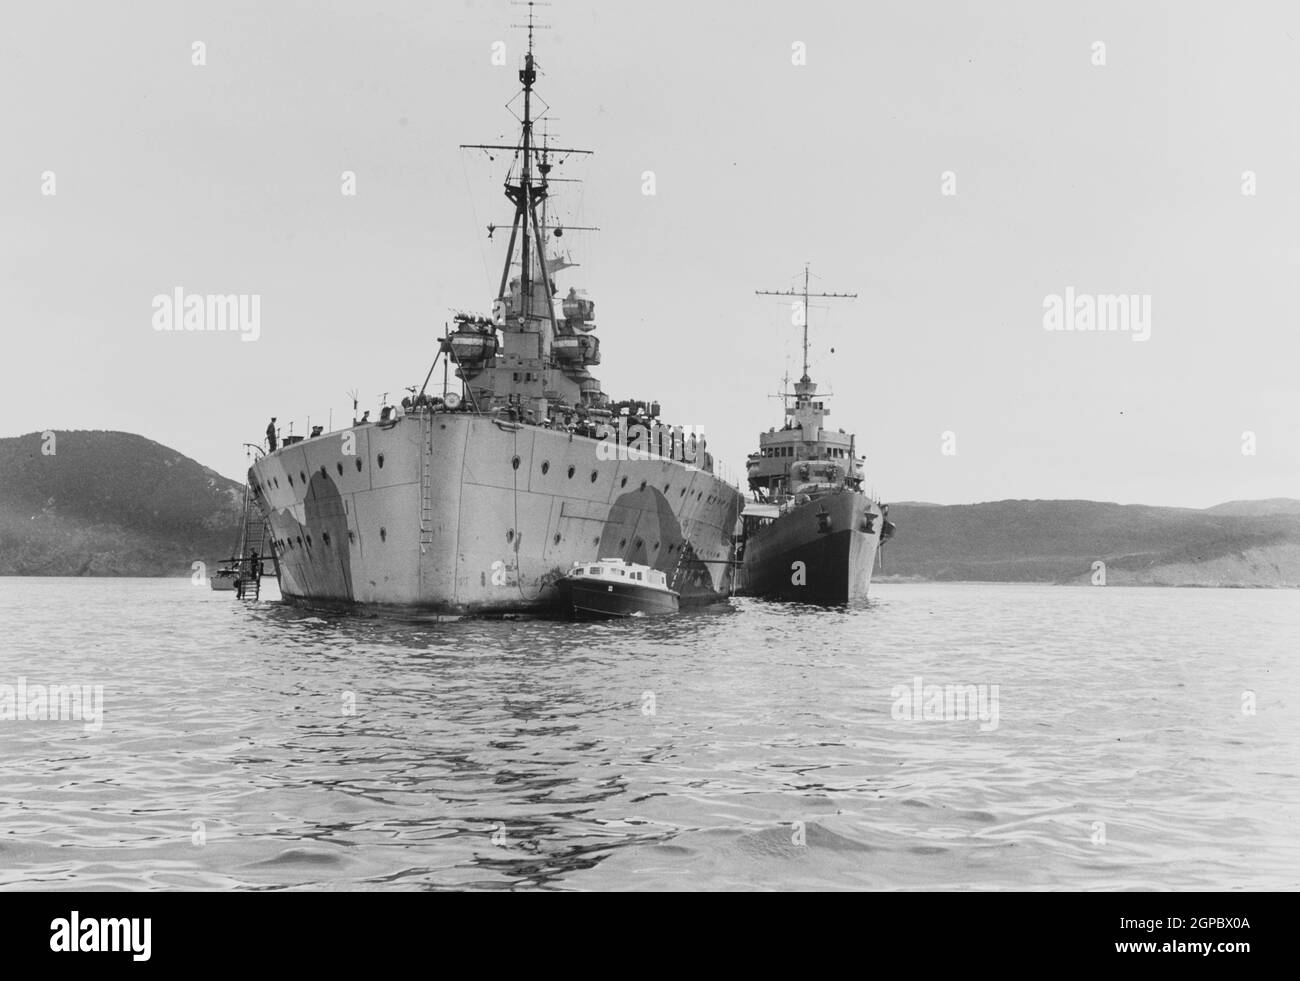 PLACENTIA BAY, NEWFOUNDLAND, CANADA - 10-12 August 1941 - Atlantic Charter Conference, 10-12 August 1941. The USS McDougal (DD-358) alongside HMS Prin Stock Photo